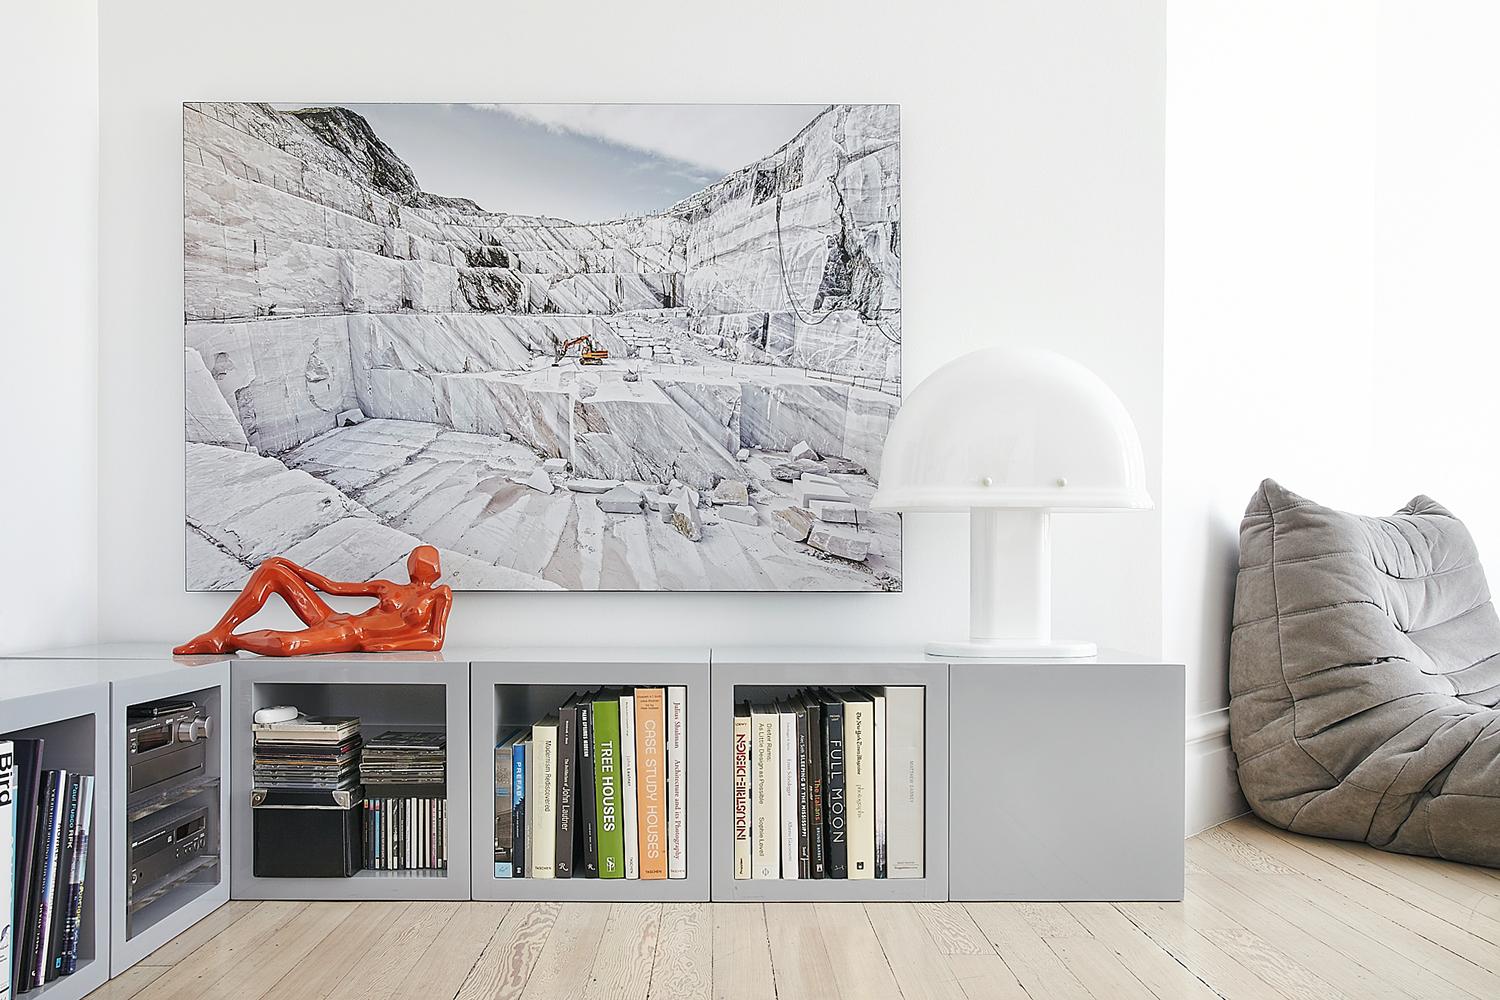 Marmo di Carrara (framed) - large format photograph of Italian marble quarry - Contemporary Photograph by Frank Schott